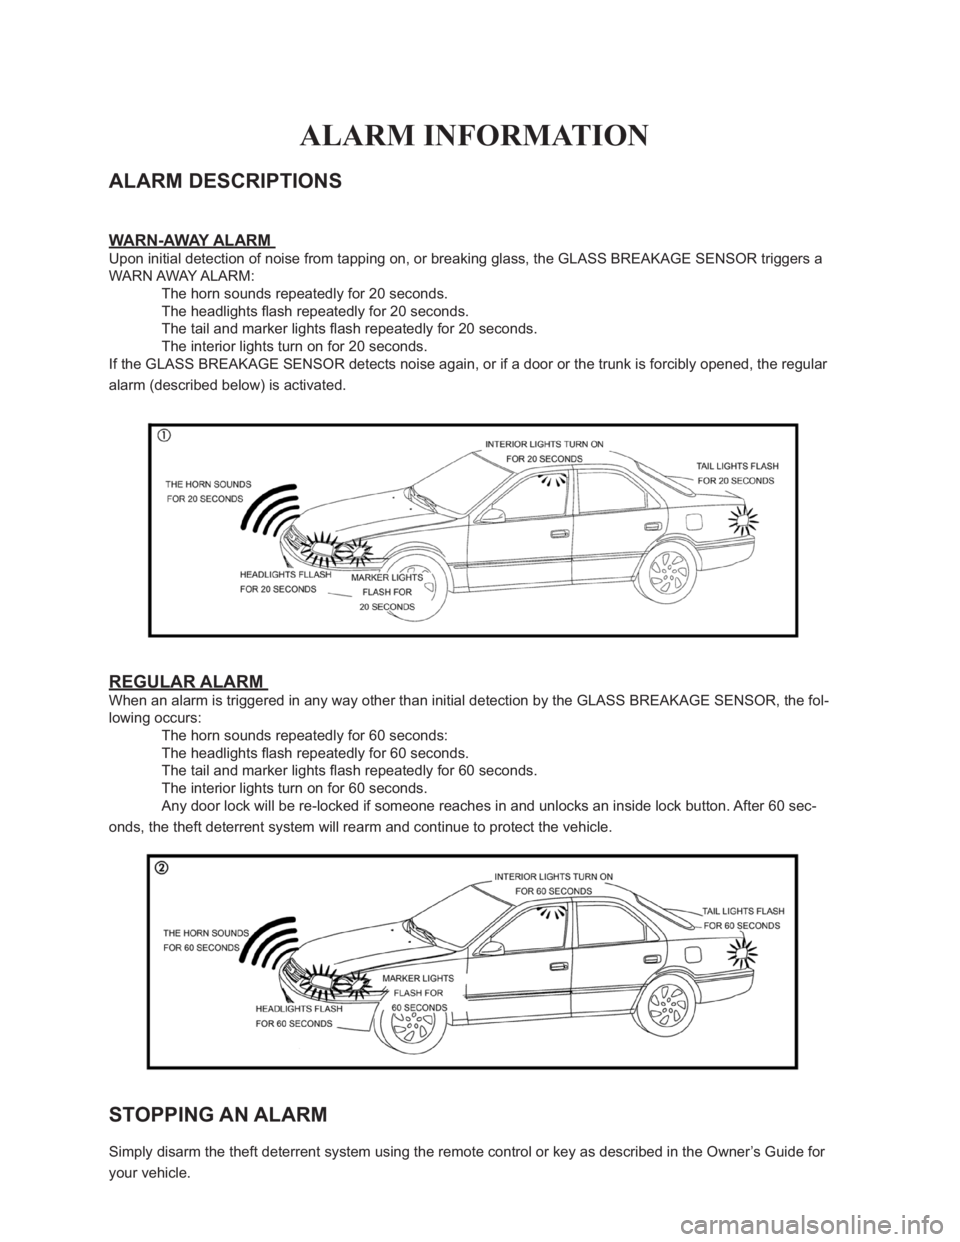 TOYOTA VENZA 2009  Accessories, Audio & Navigation (in English) ALARM INFORMATION
ALARM DESCRIPTIONS 
WARN-AWAY ALARM 
Upon initial detection of noise from tapping on, or breaking glass, the GLASS BREAKAGE SENSOR triggers a 
WARN AWAY ALARM: 
� �7�K�H��K�R�U�Q�